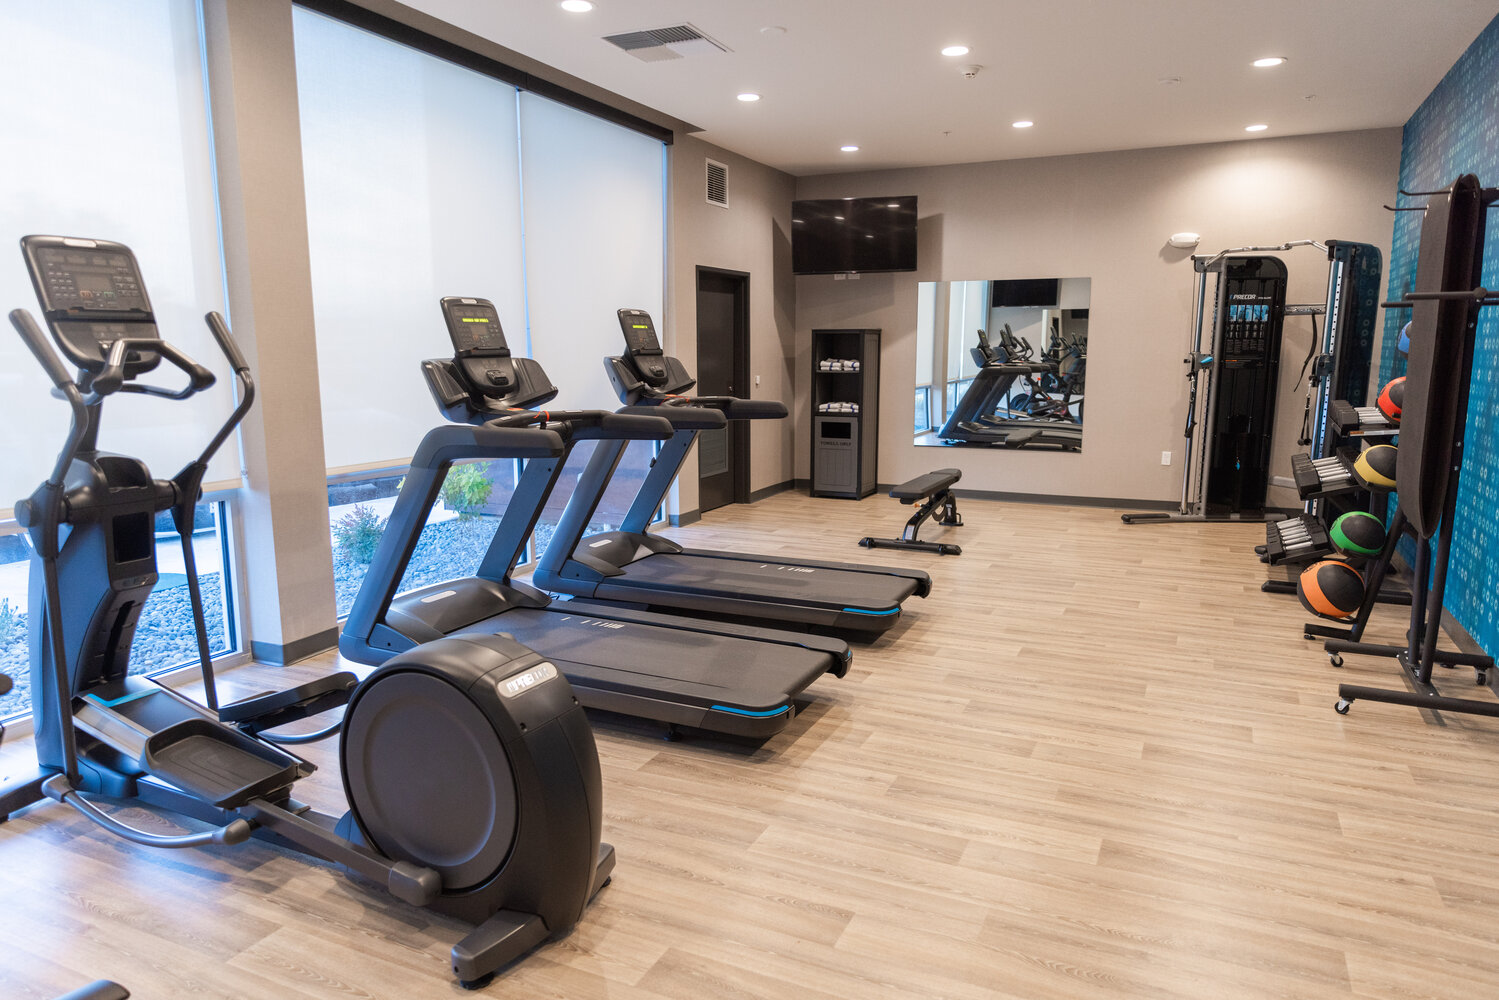 La Quinta by Wyndham features an exercise room in Centralia on Wednesday, Nov. 15.